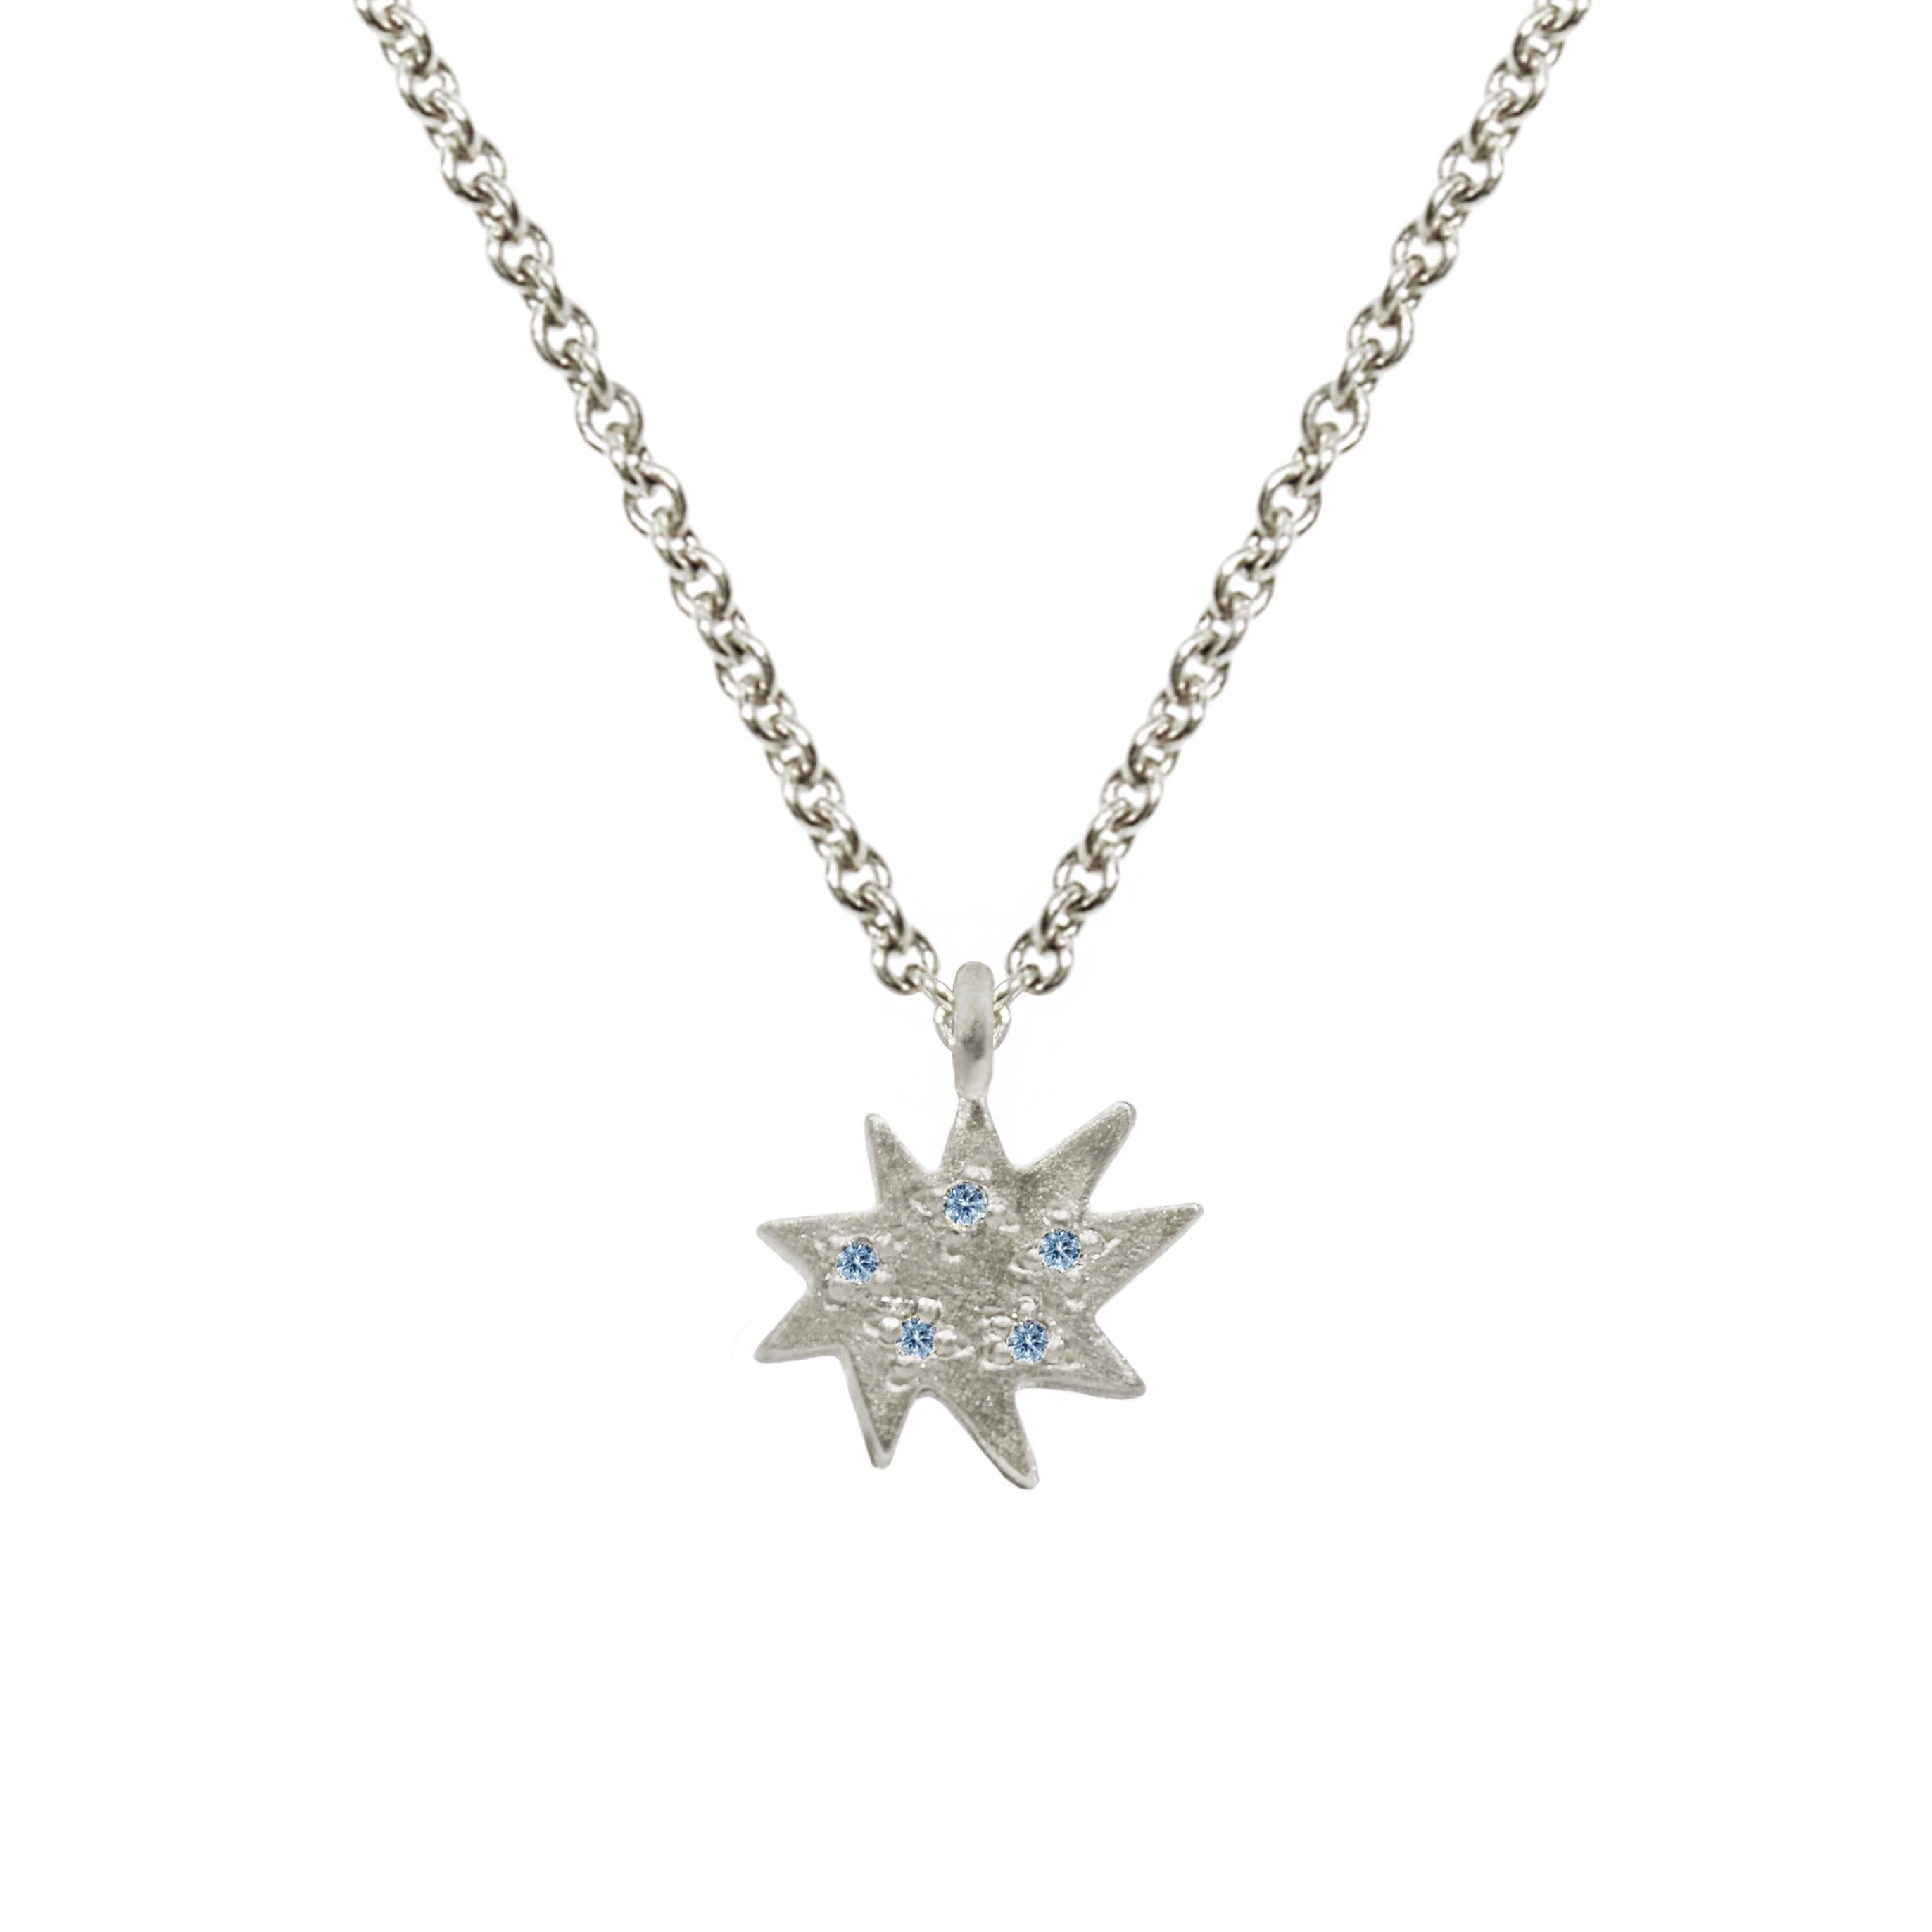 Women's Emily Kuvin Mini Stella Silver and Amethyst Star Dainty Layering Necklace